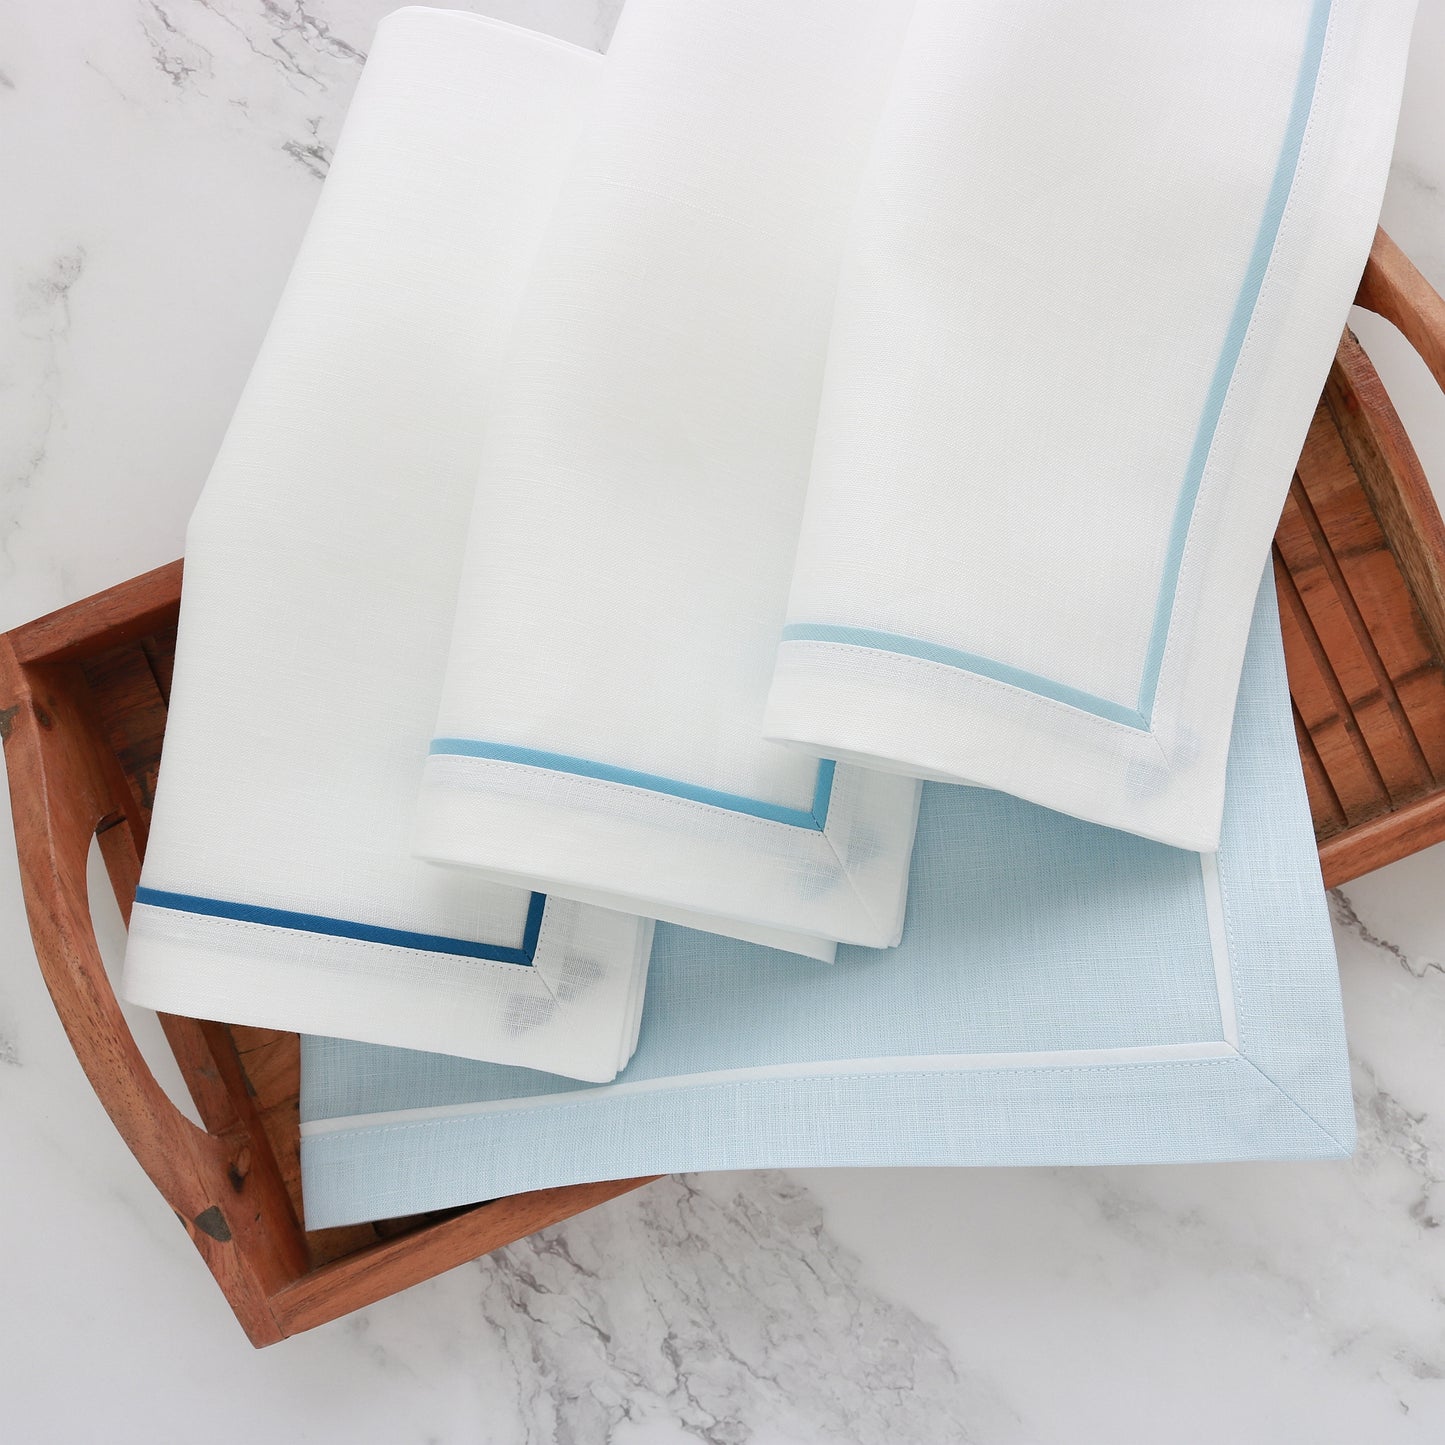 various white napkins with blue inset tape